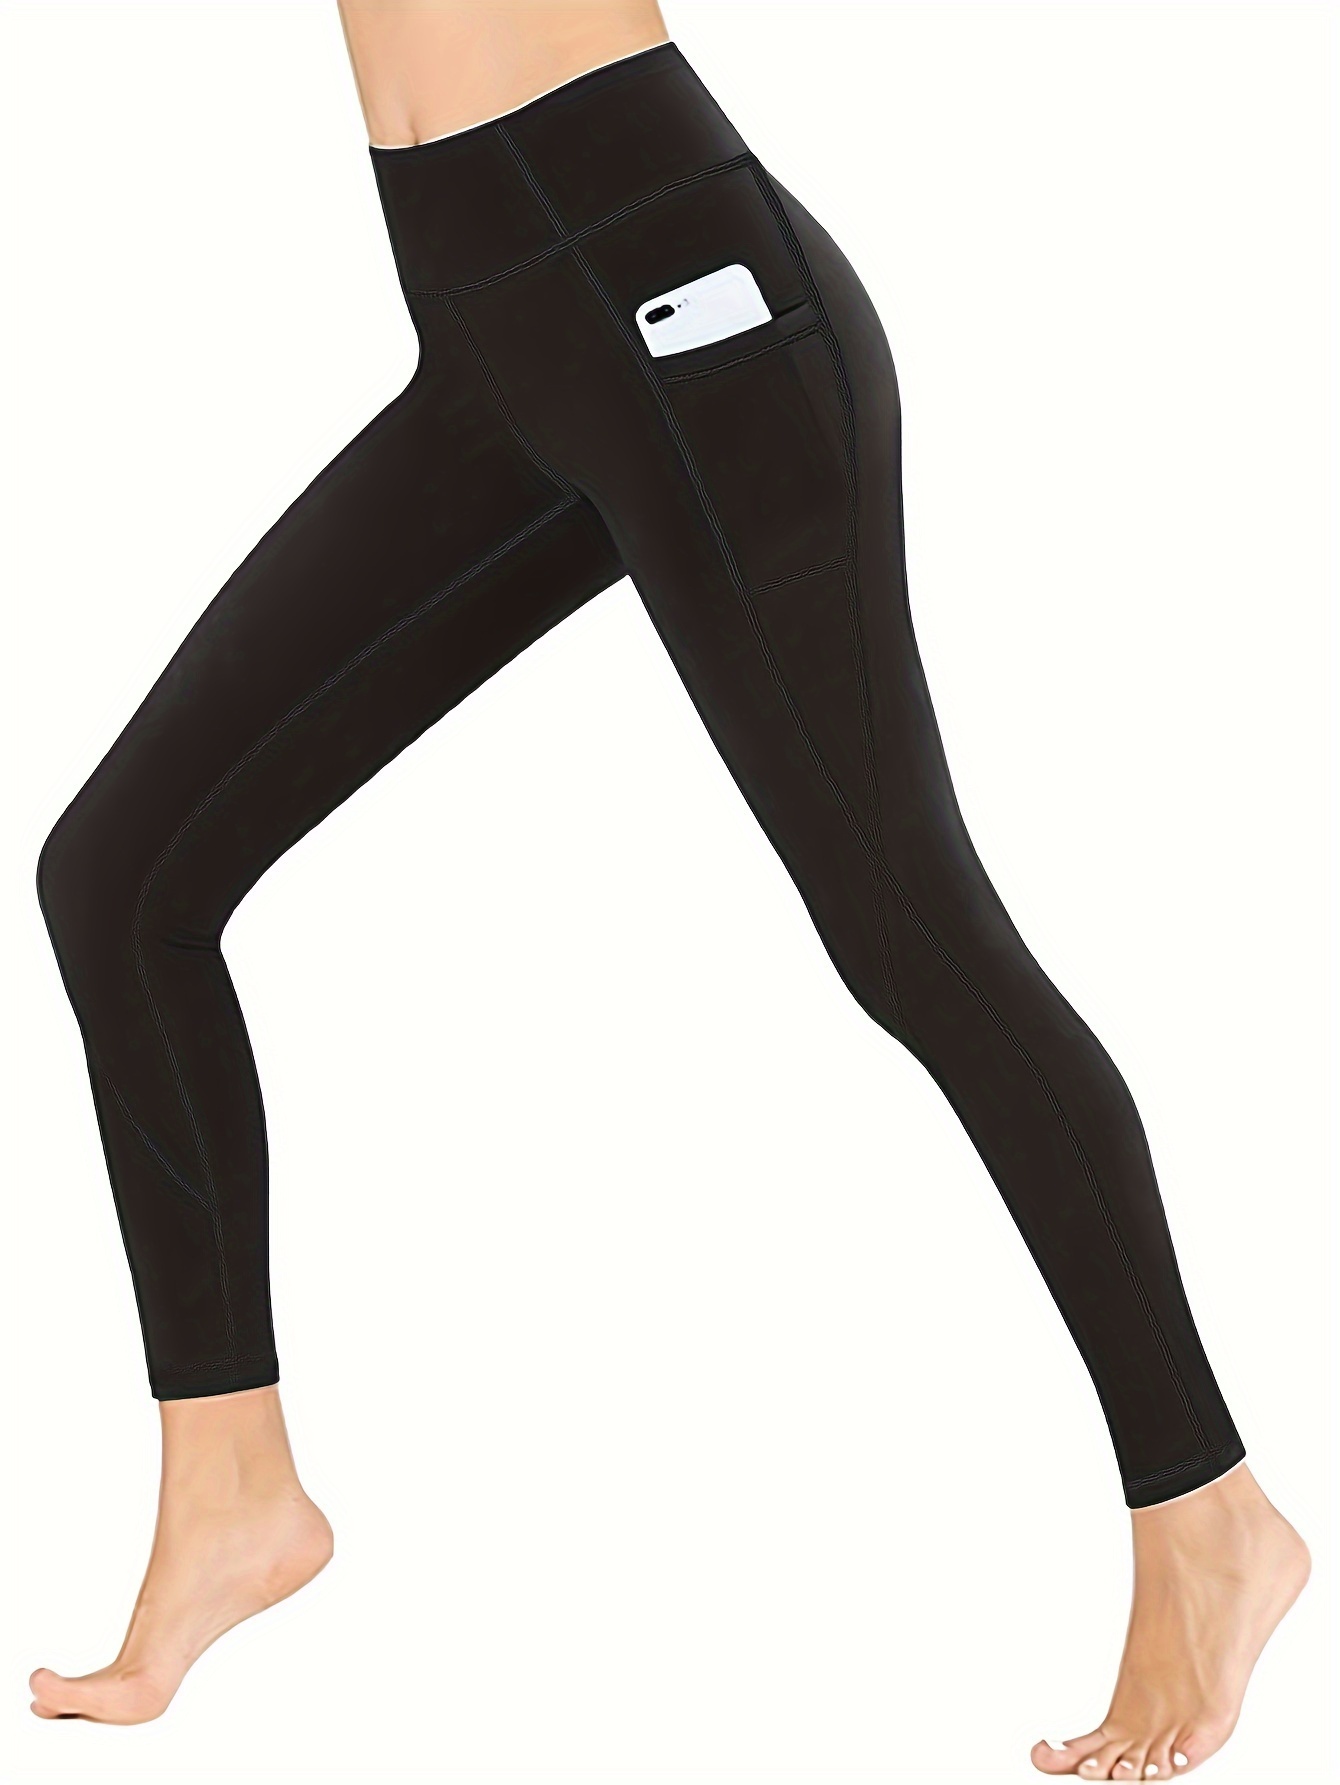 Women's High Waist Fleece-Lined Leggings for Sports, Fitness, and Yoga -  Plus Size, Butt-Lifting, and Thick for Extra Warmth